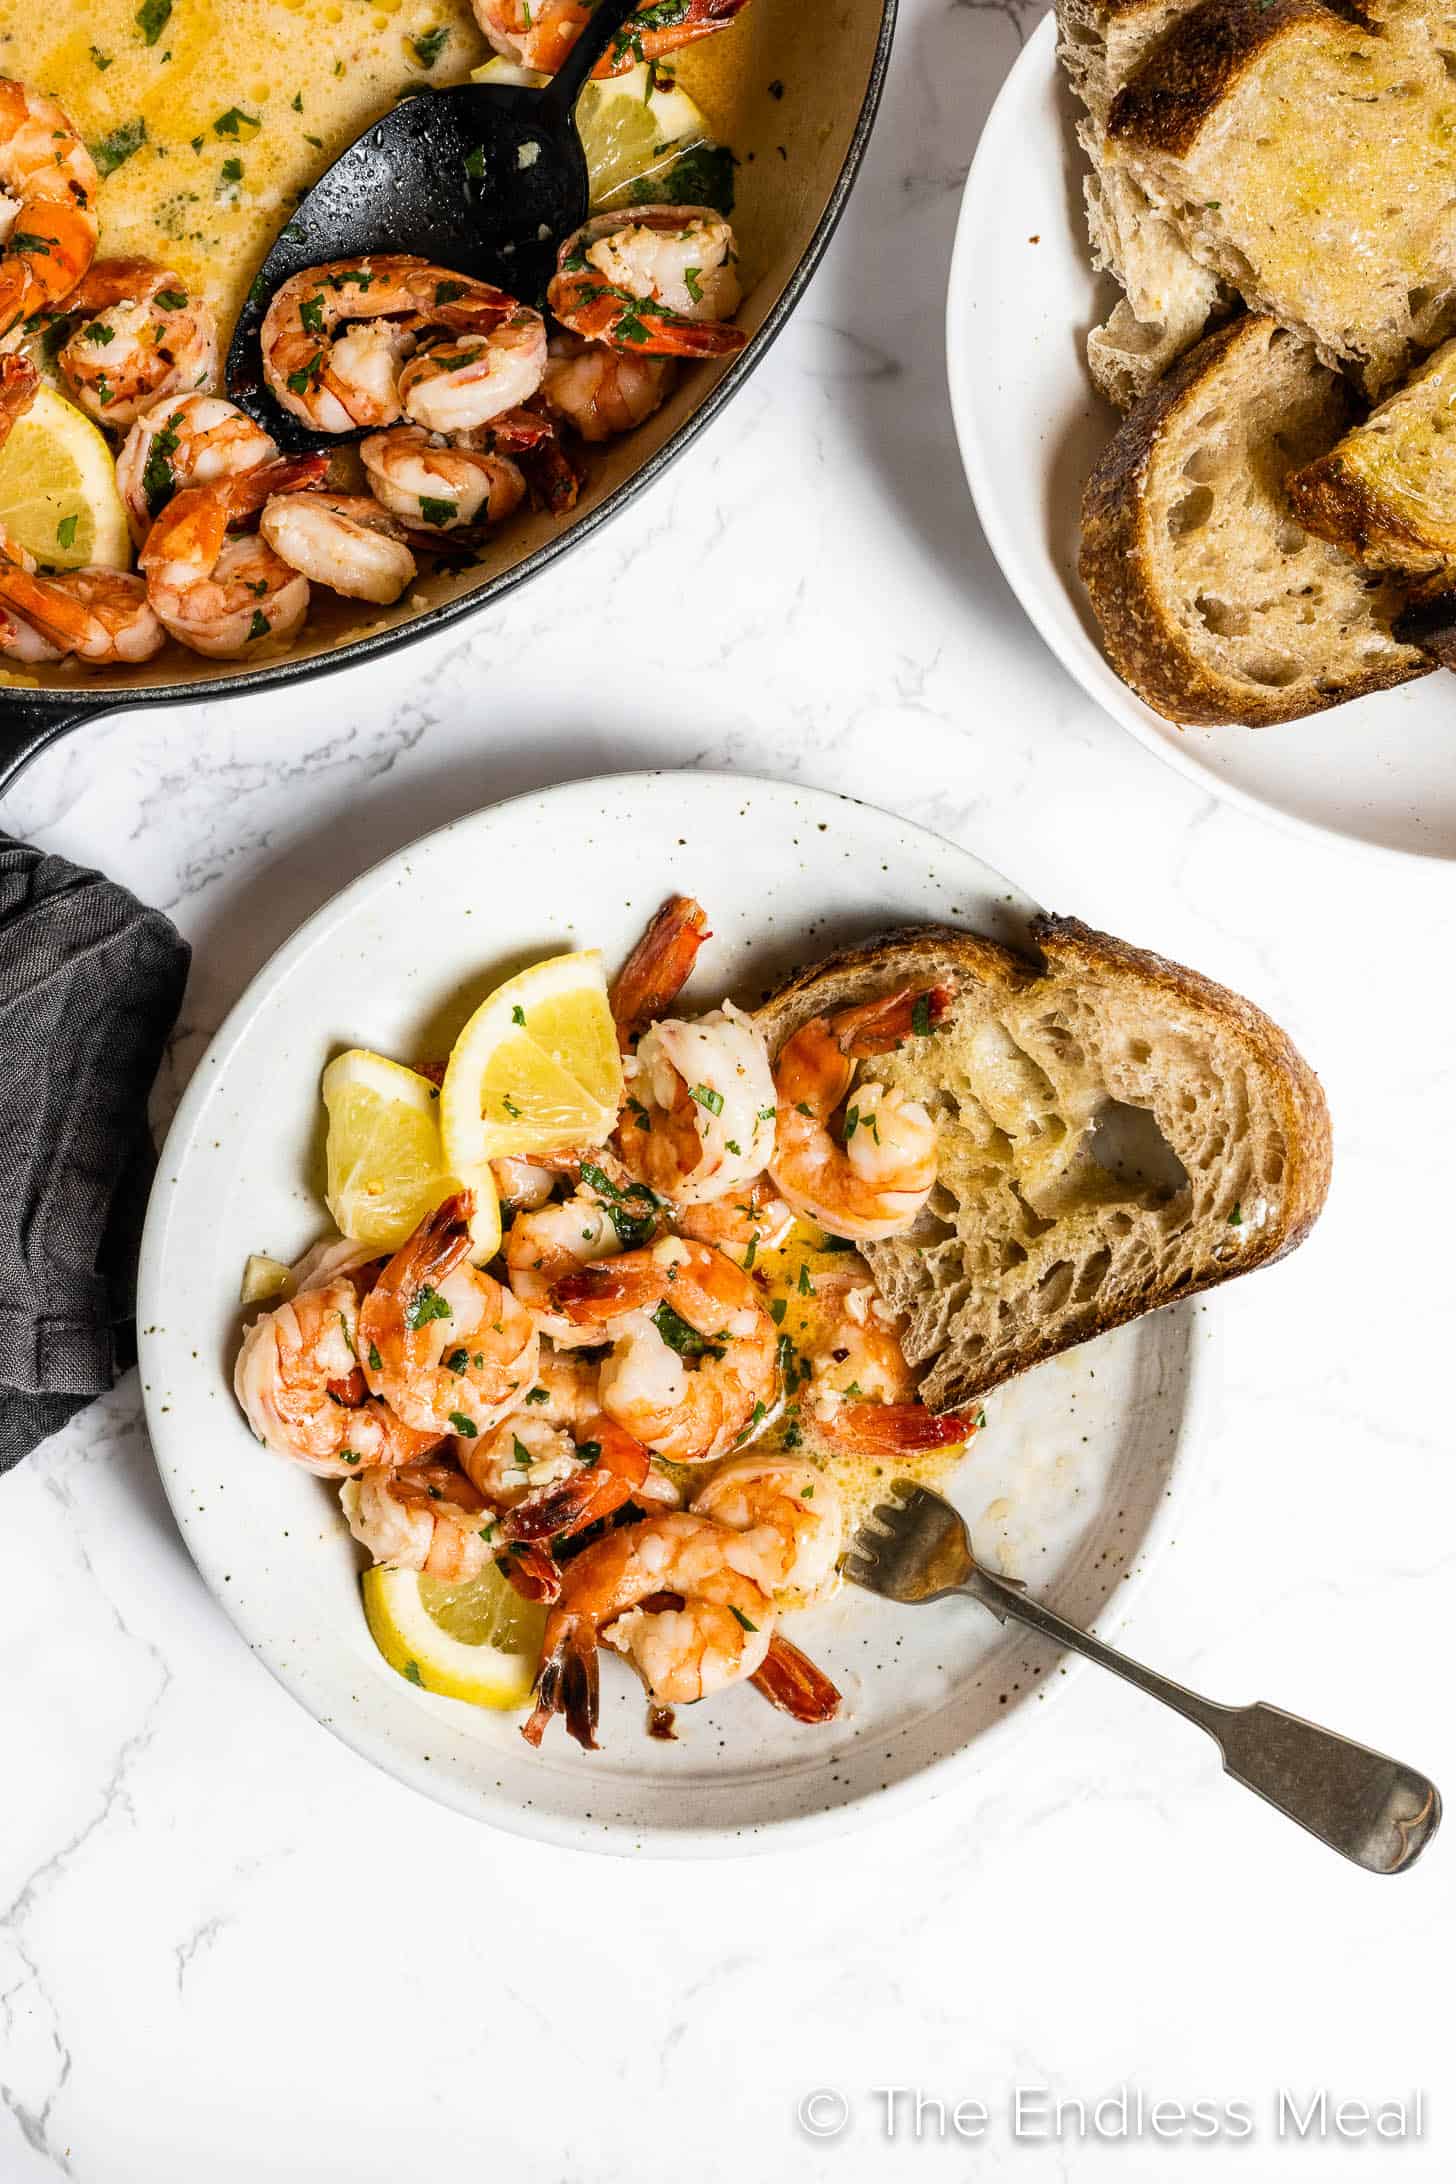 A dinner table with Lemon Garlic Butter Shrimp and bread